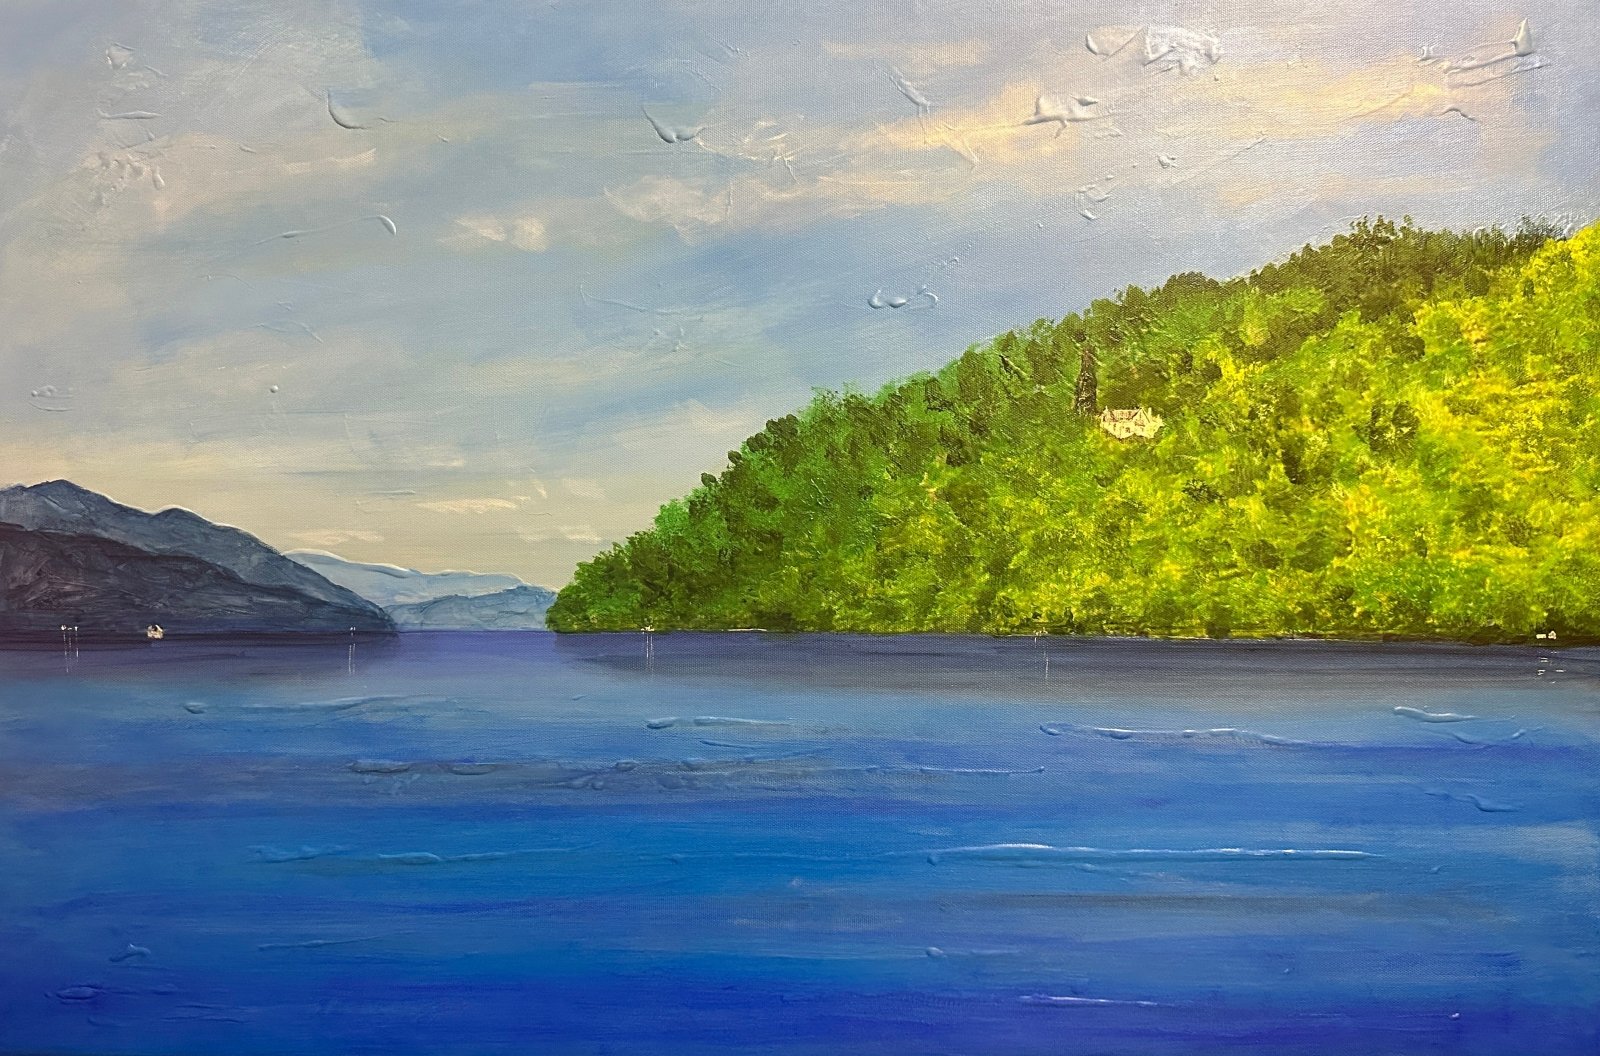 Loch Ness-Signed Art Prints By Scottish Artist Hunter-Scottish Lochs & Mountains Art Gallery-Paintings, Prints, Homeware, Art Gifts From Scotland By Scottish Artist Kevin Hunter